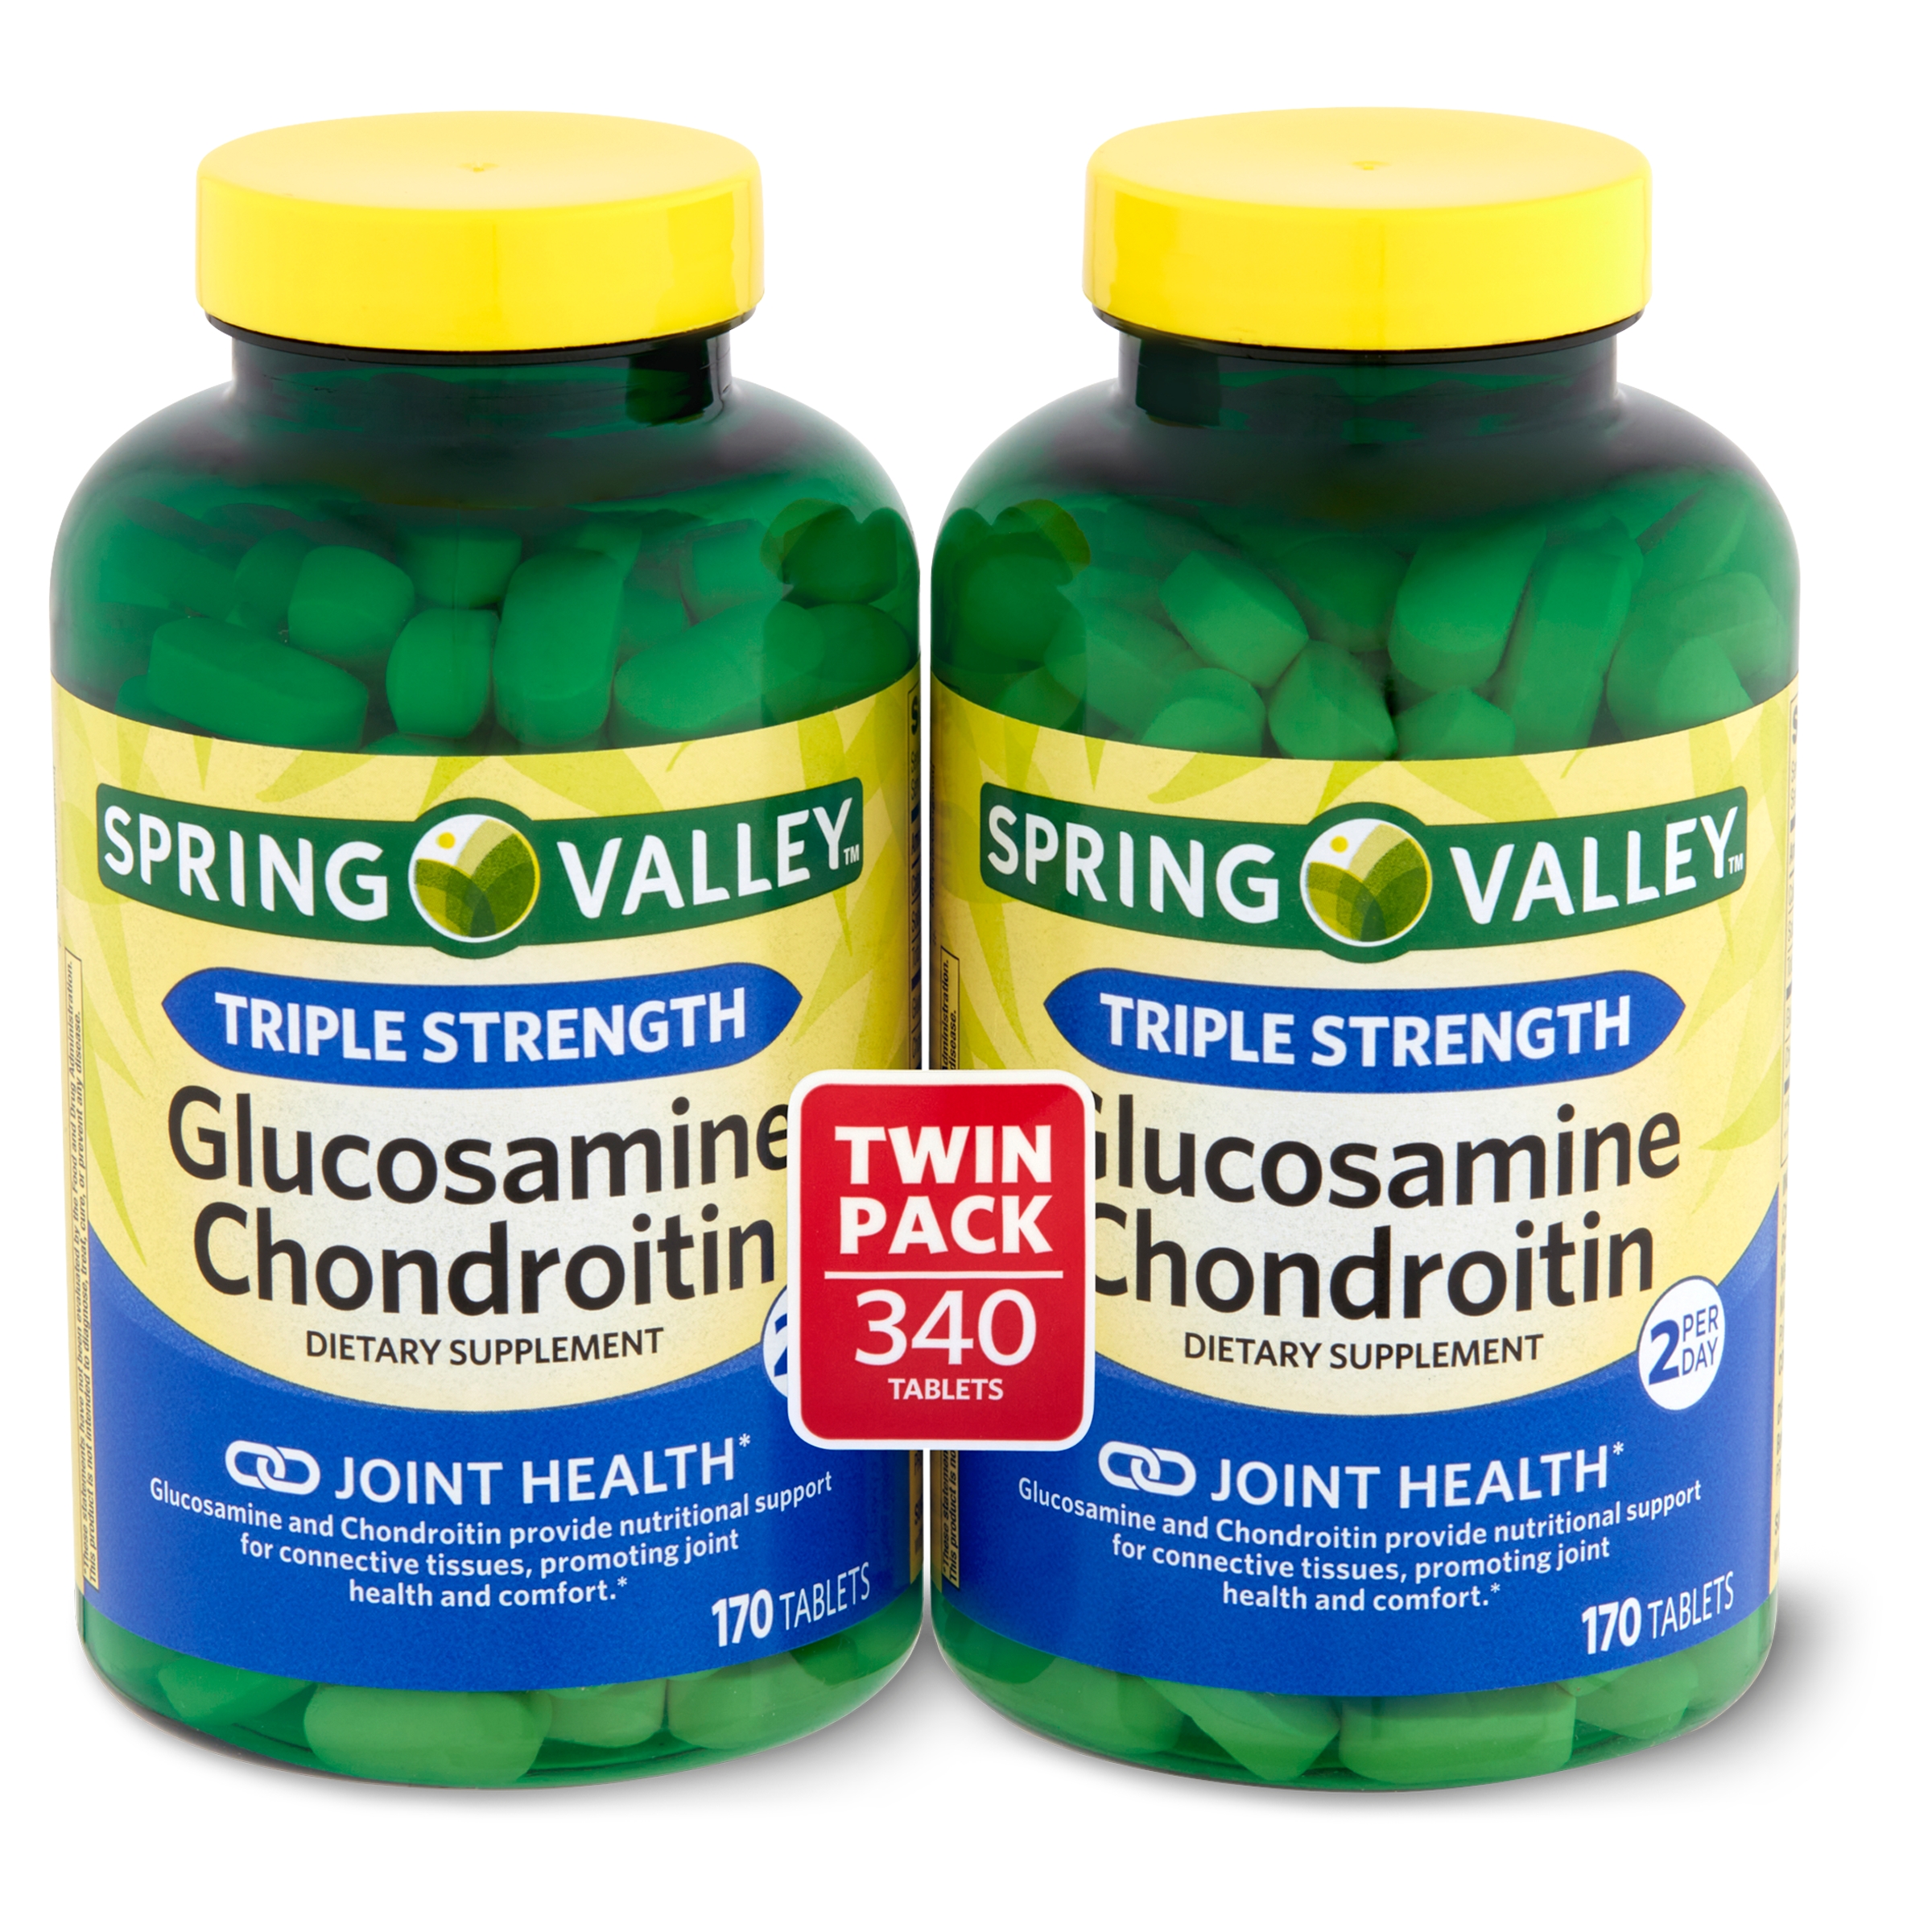 Spring Valley Glucosamine Chondroitin Dietary Supplement Twin Pack, 340 Count, 2 Pack - image 1 of 7